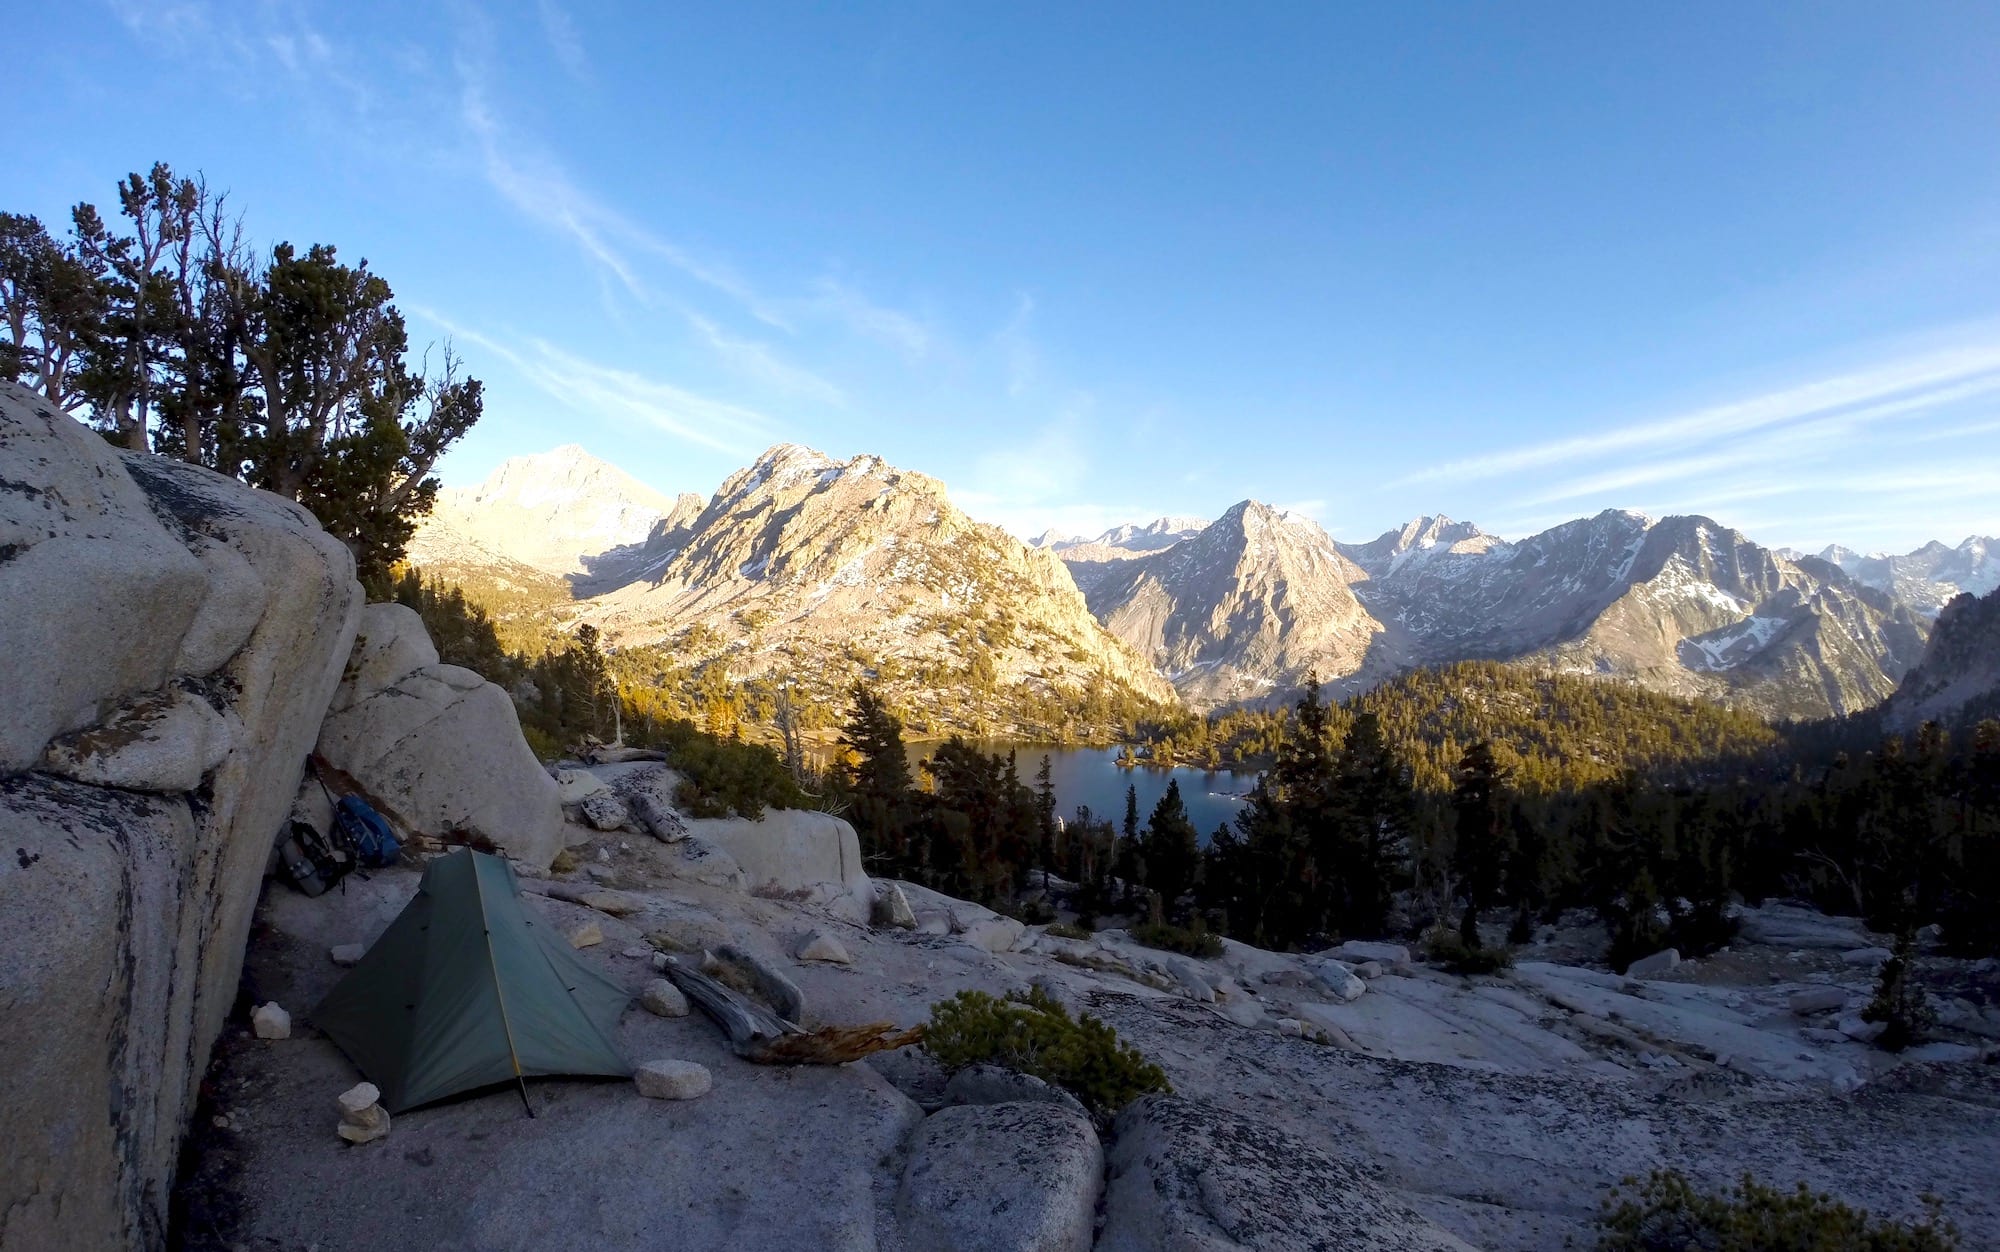 Setting up camp in the Sierra Nevadas 